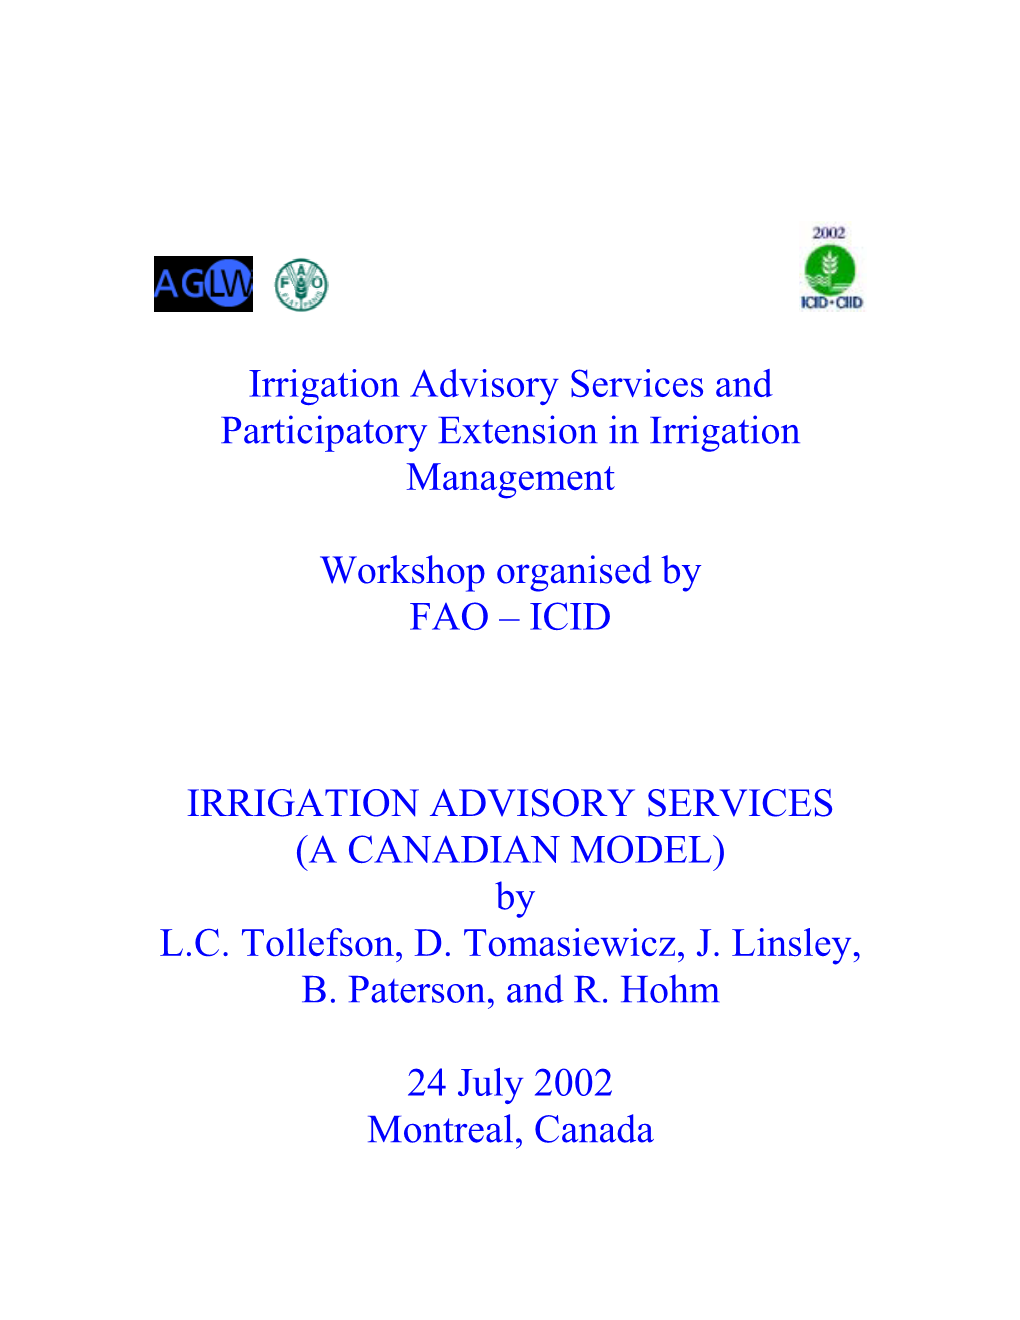 Irrigation Advisory Services and Participatory Extension in Irrigation Management